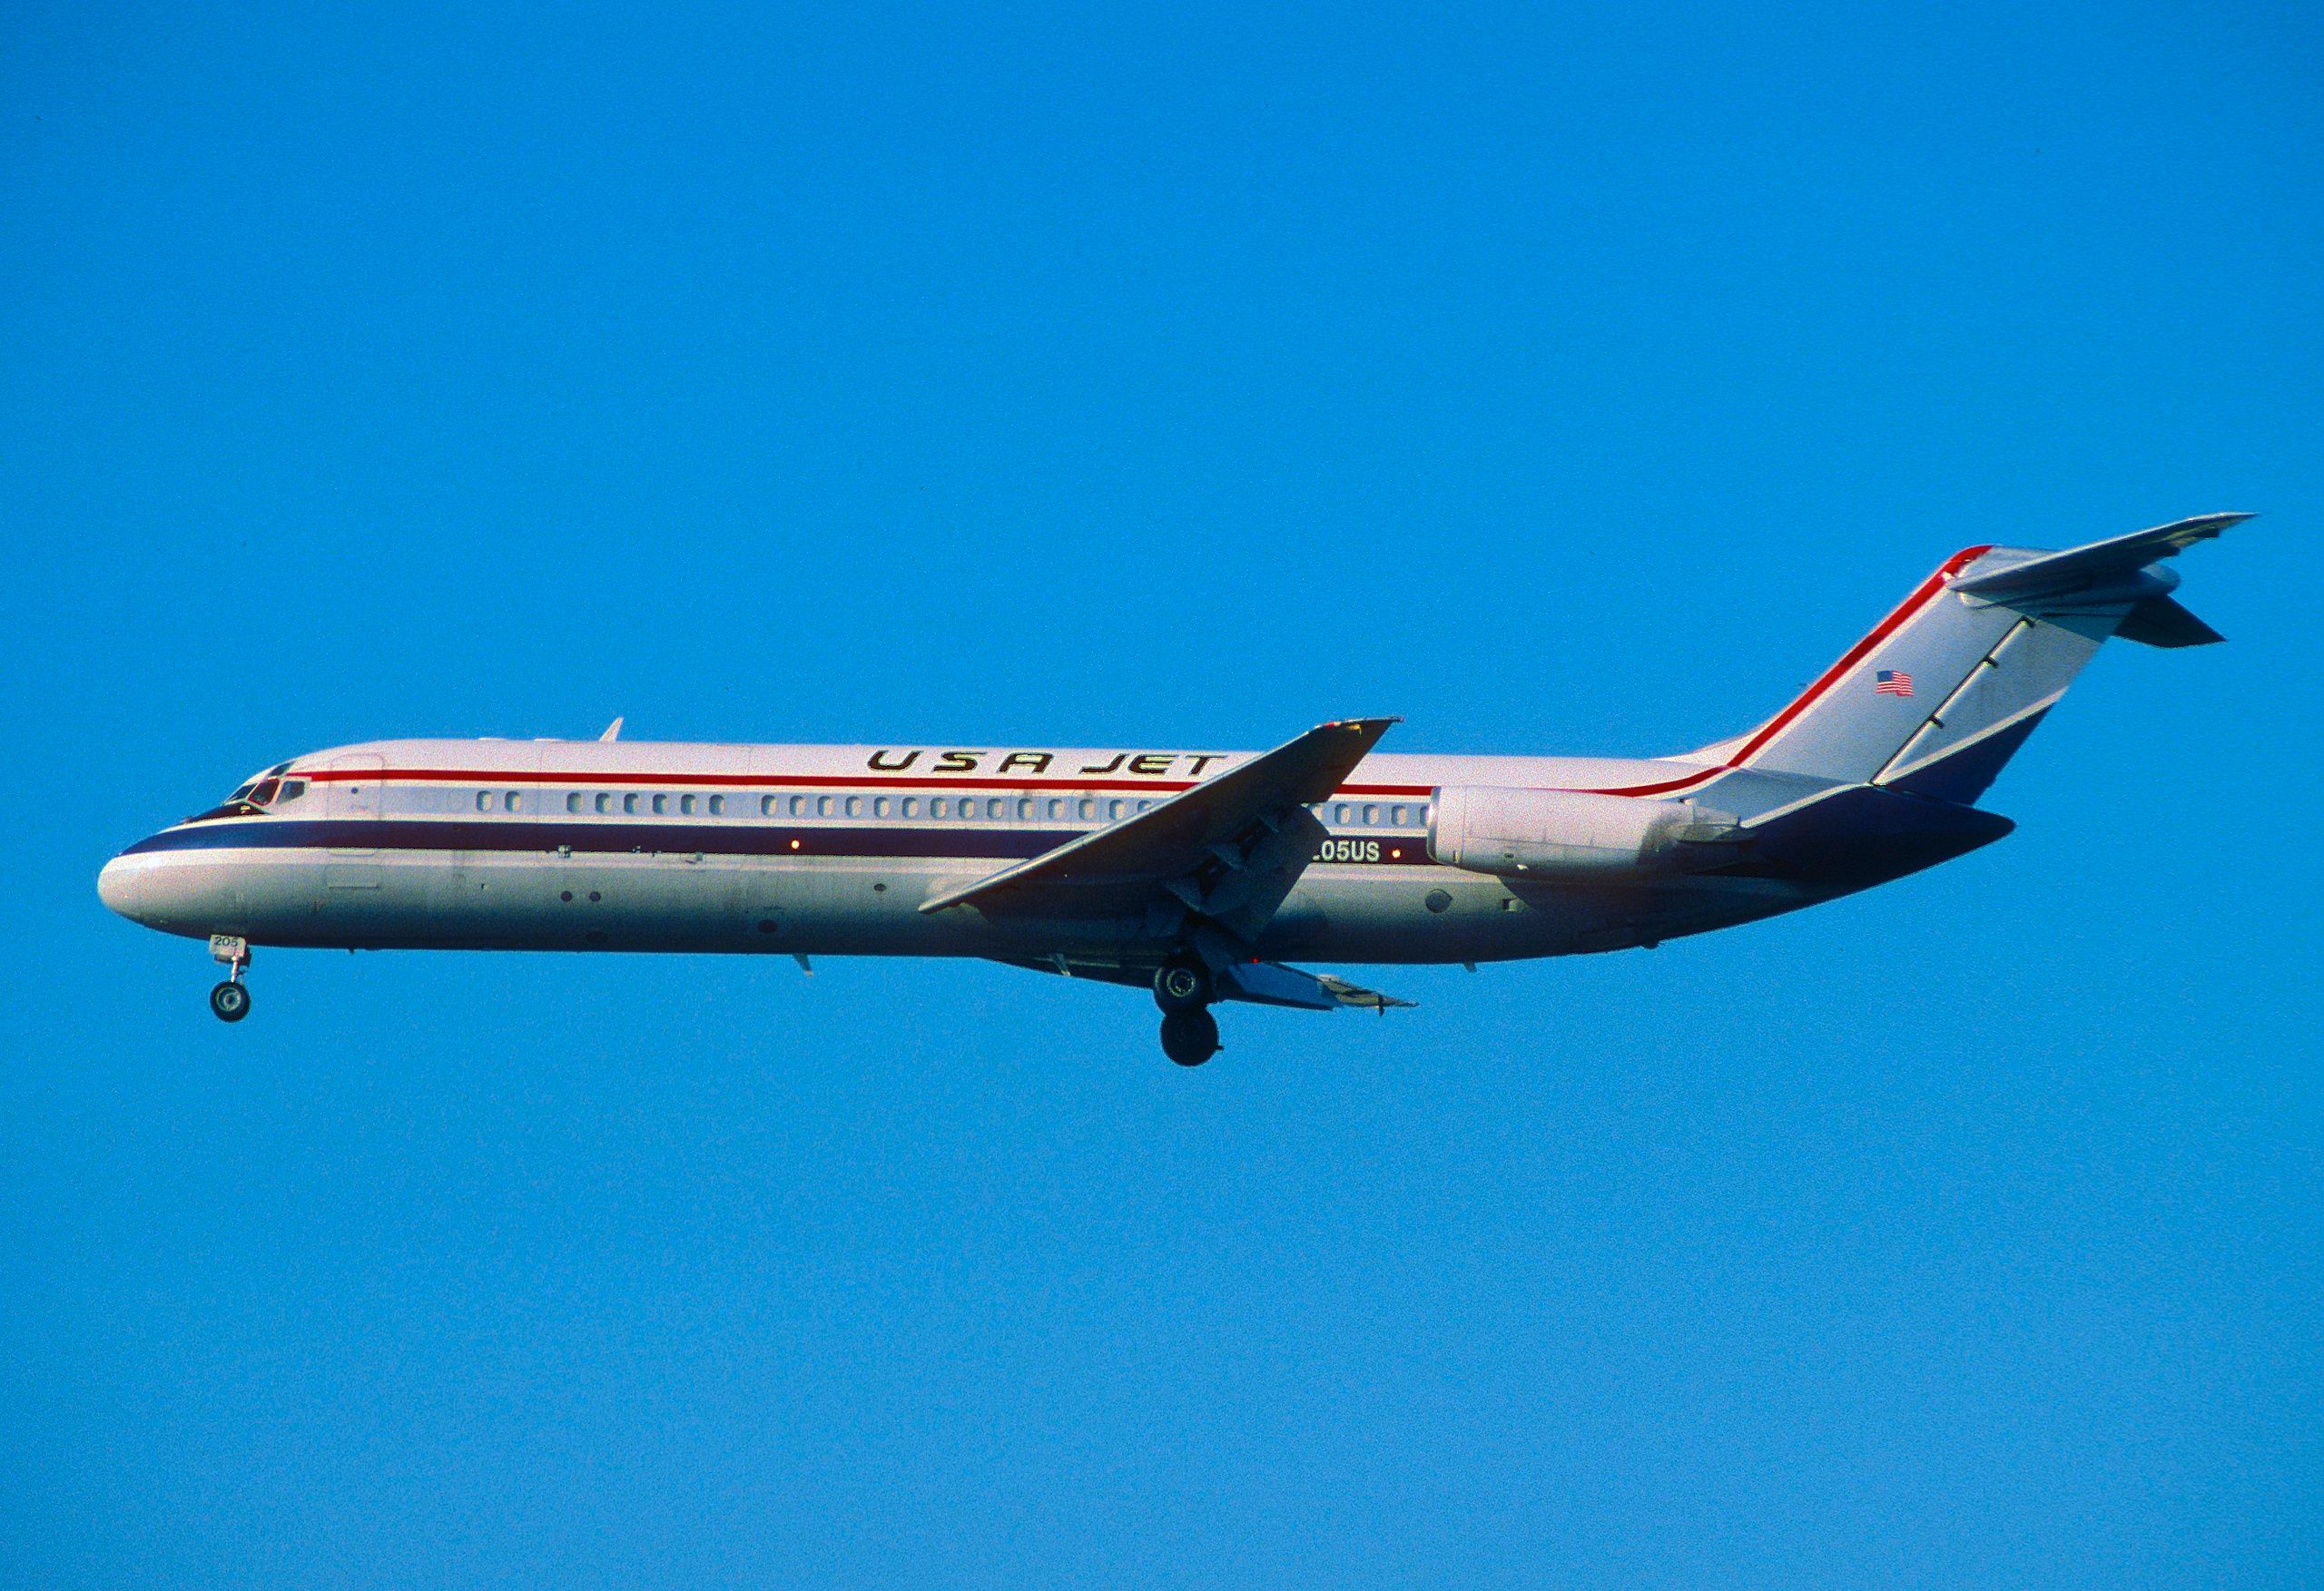 USA Jet Airlines DC-9